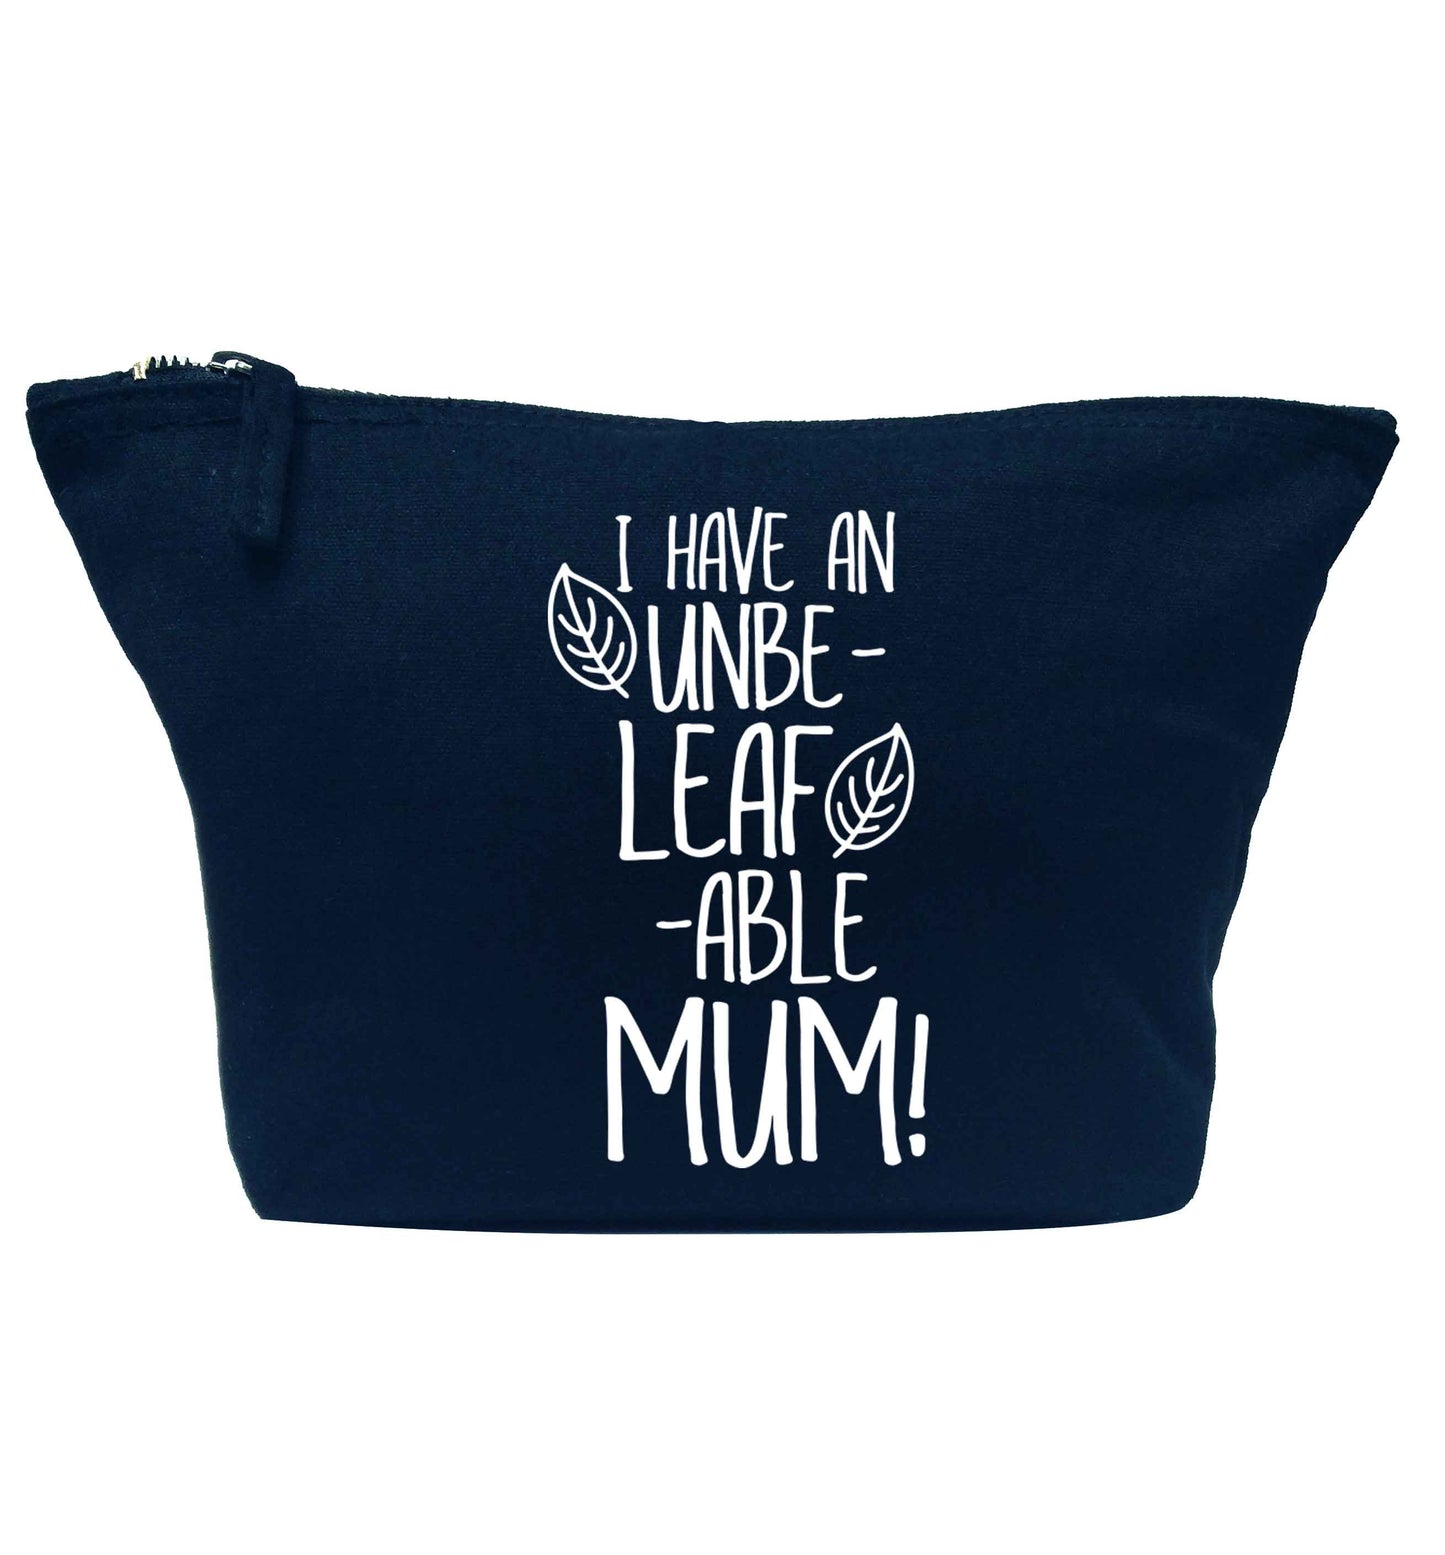 I have an unbeleafable mum! navy makeup bag